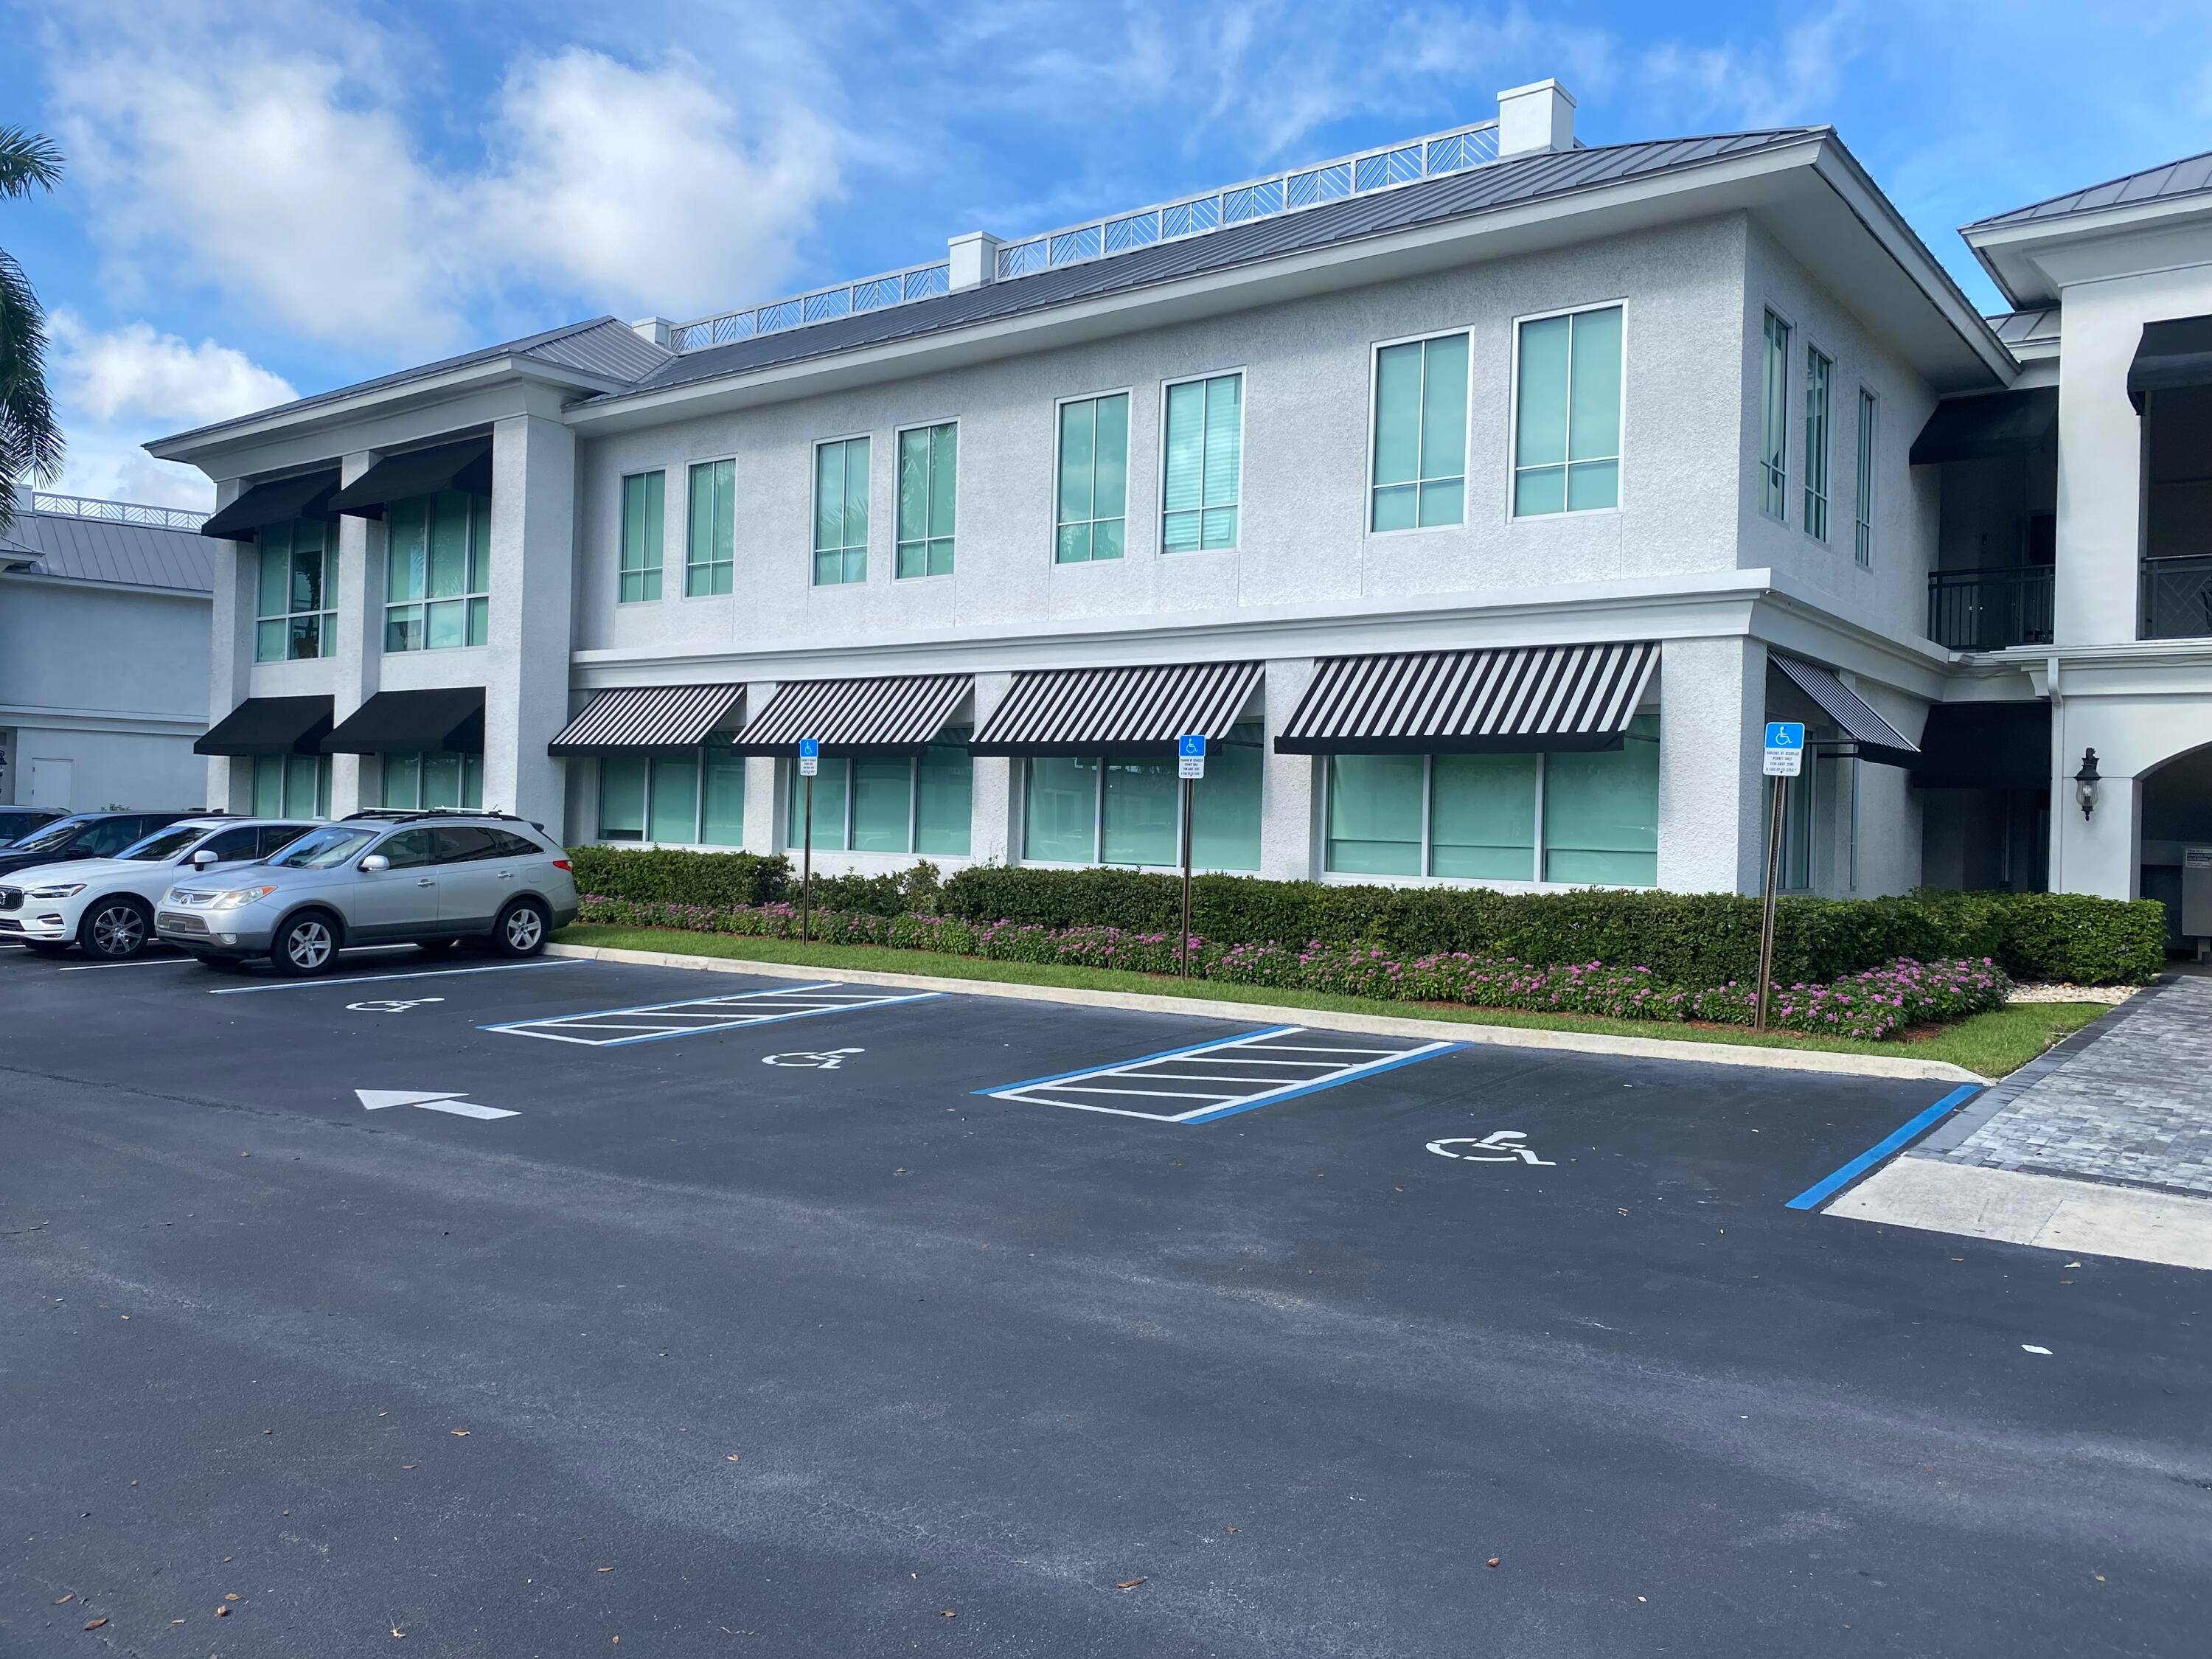 GREAT OPPORTUNITY FOR OWNER OPERATOR SOLE PROPRIETOR TO OWN THIS IMMACULATE PROFESSIONAL OFFICE SUITE LOCATED IN THE HEART OF BOCA BUSINESS DISTRICT.